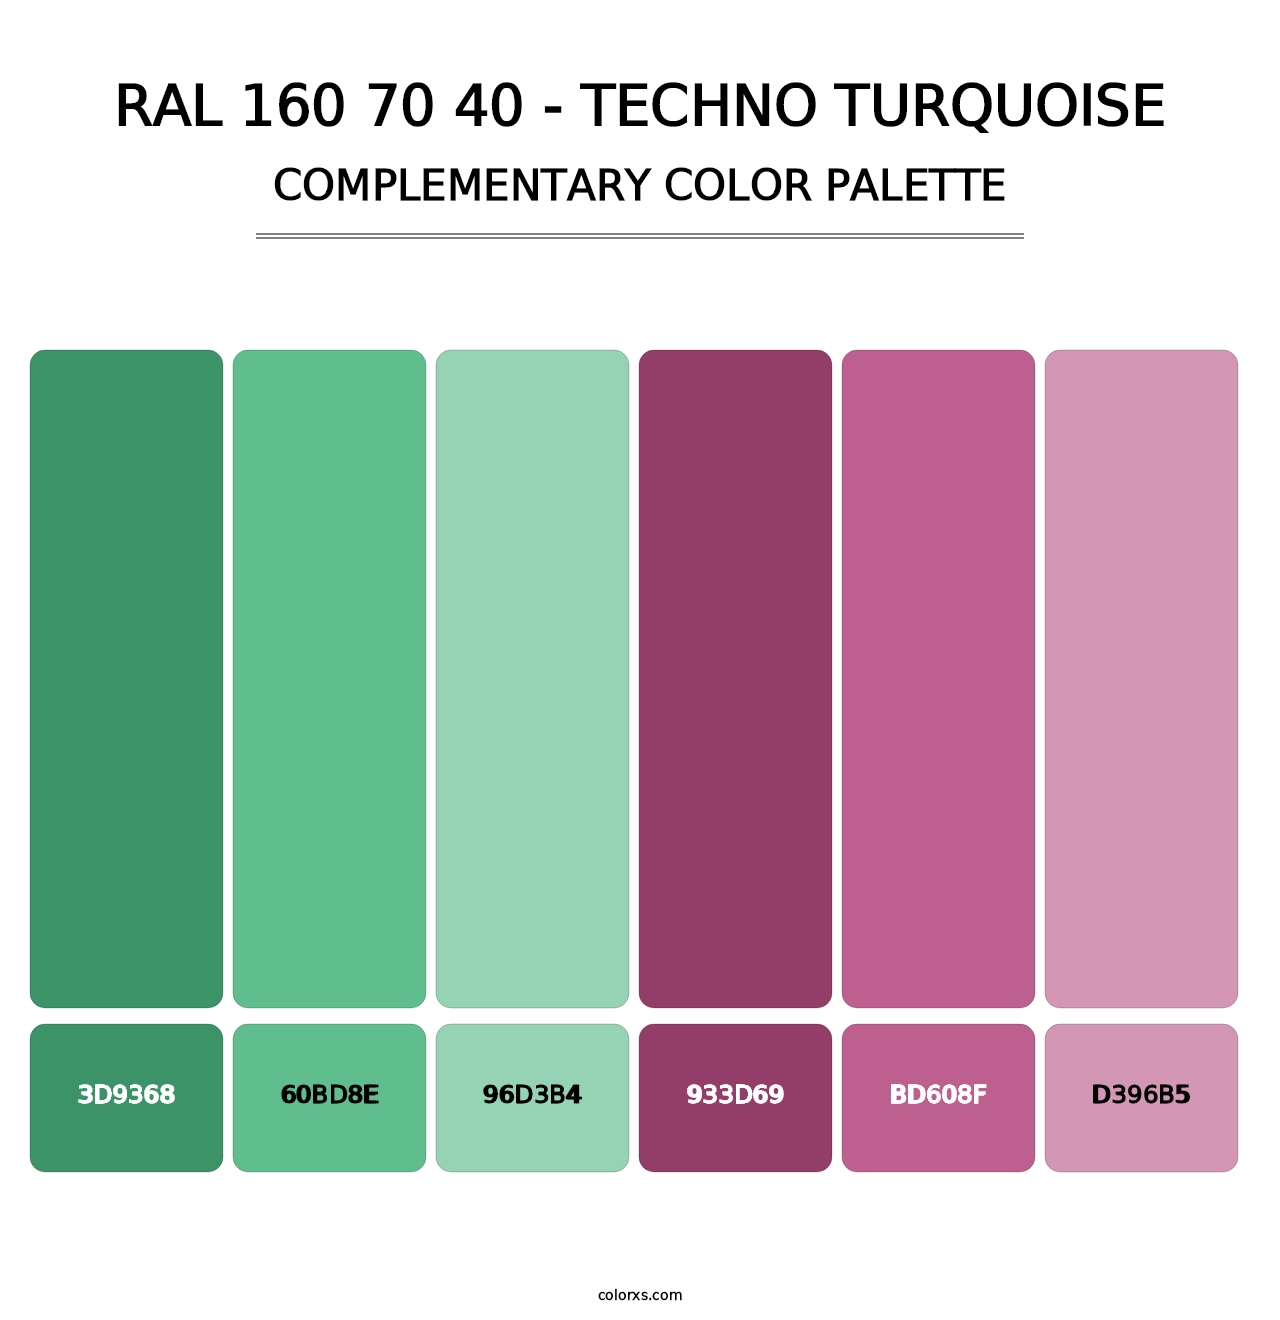 RAL 160 70 40 - Techno Turquoise - Complementary Color Palette